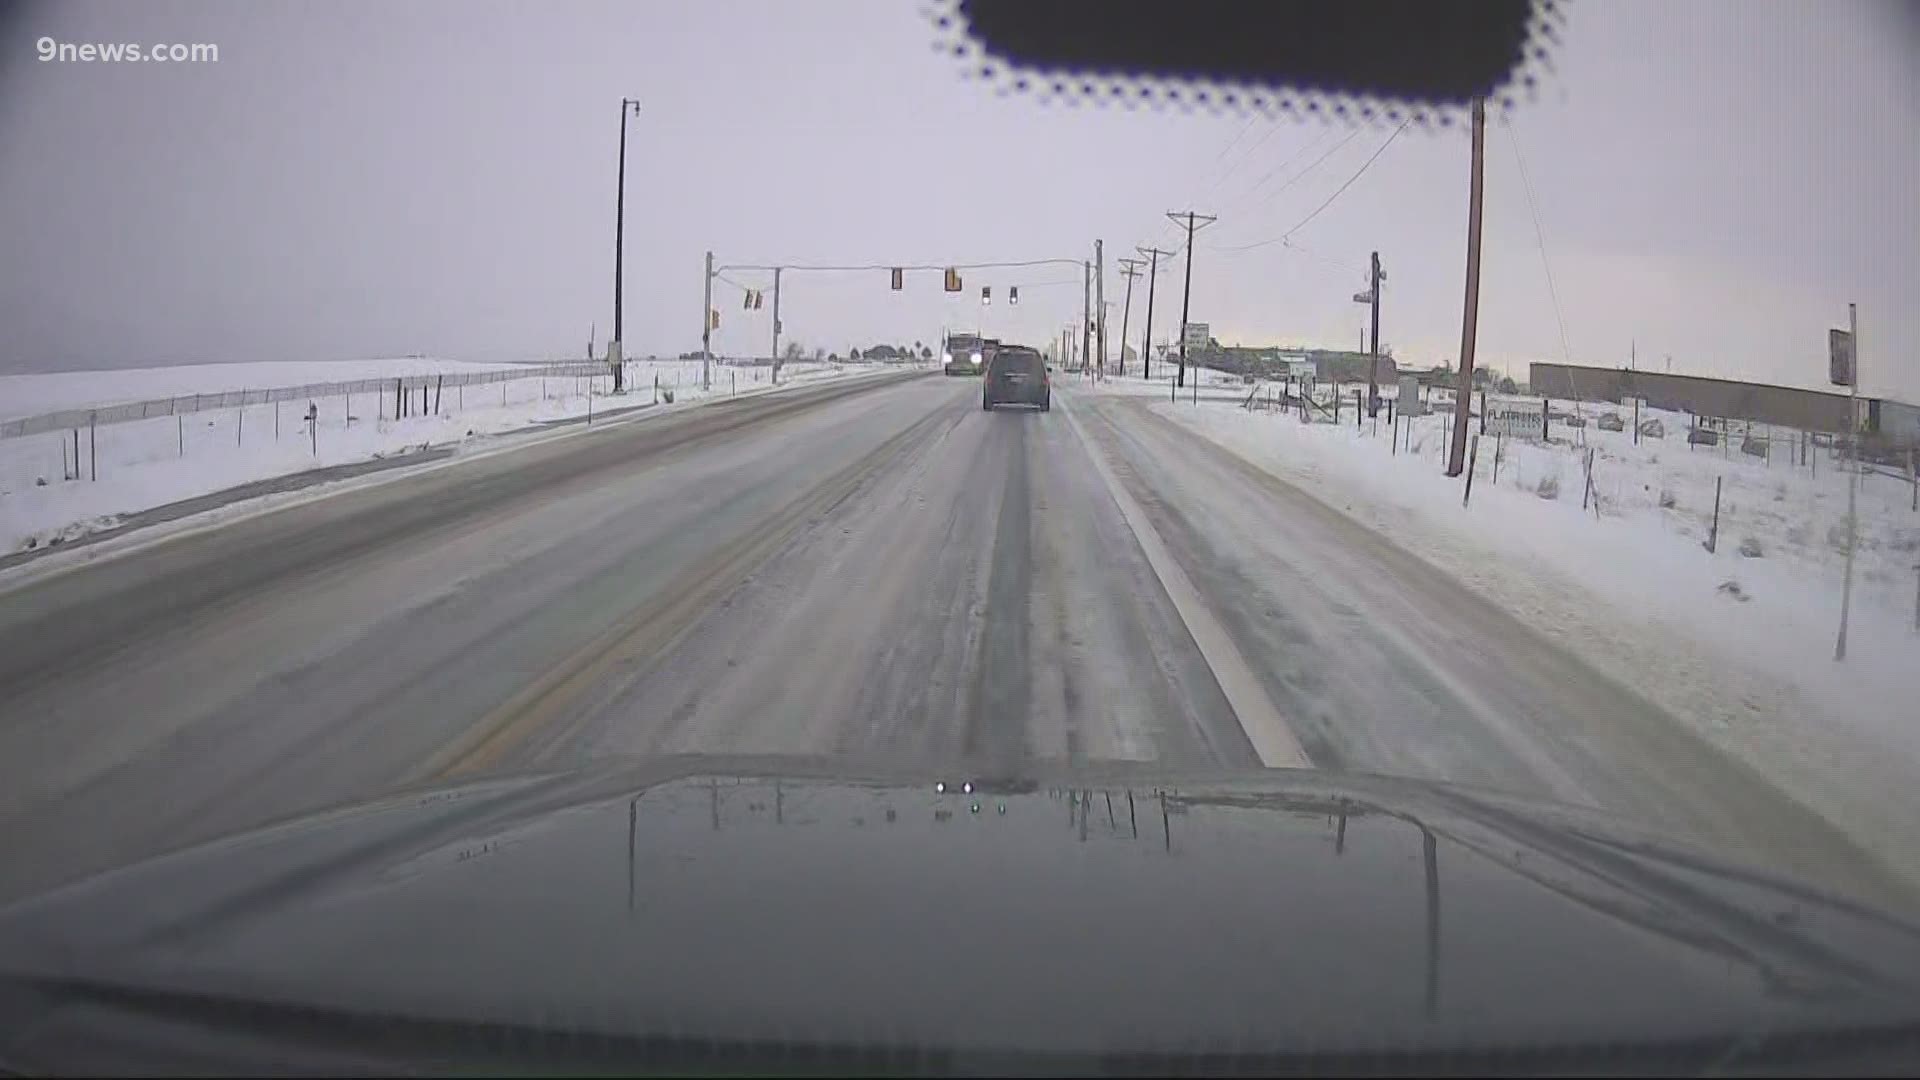 9NEWS reporter Jordan Chavez has a look at wet road conditions Wednesday morning along Highway 93 near Boulder.